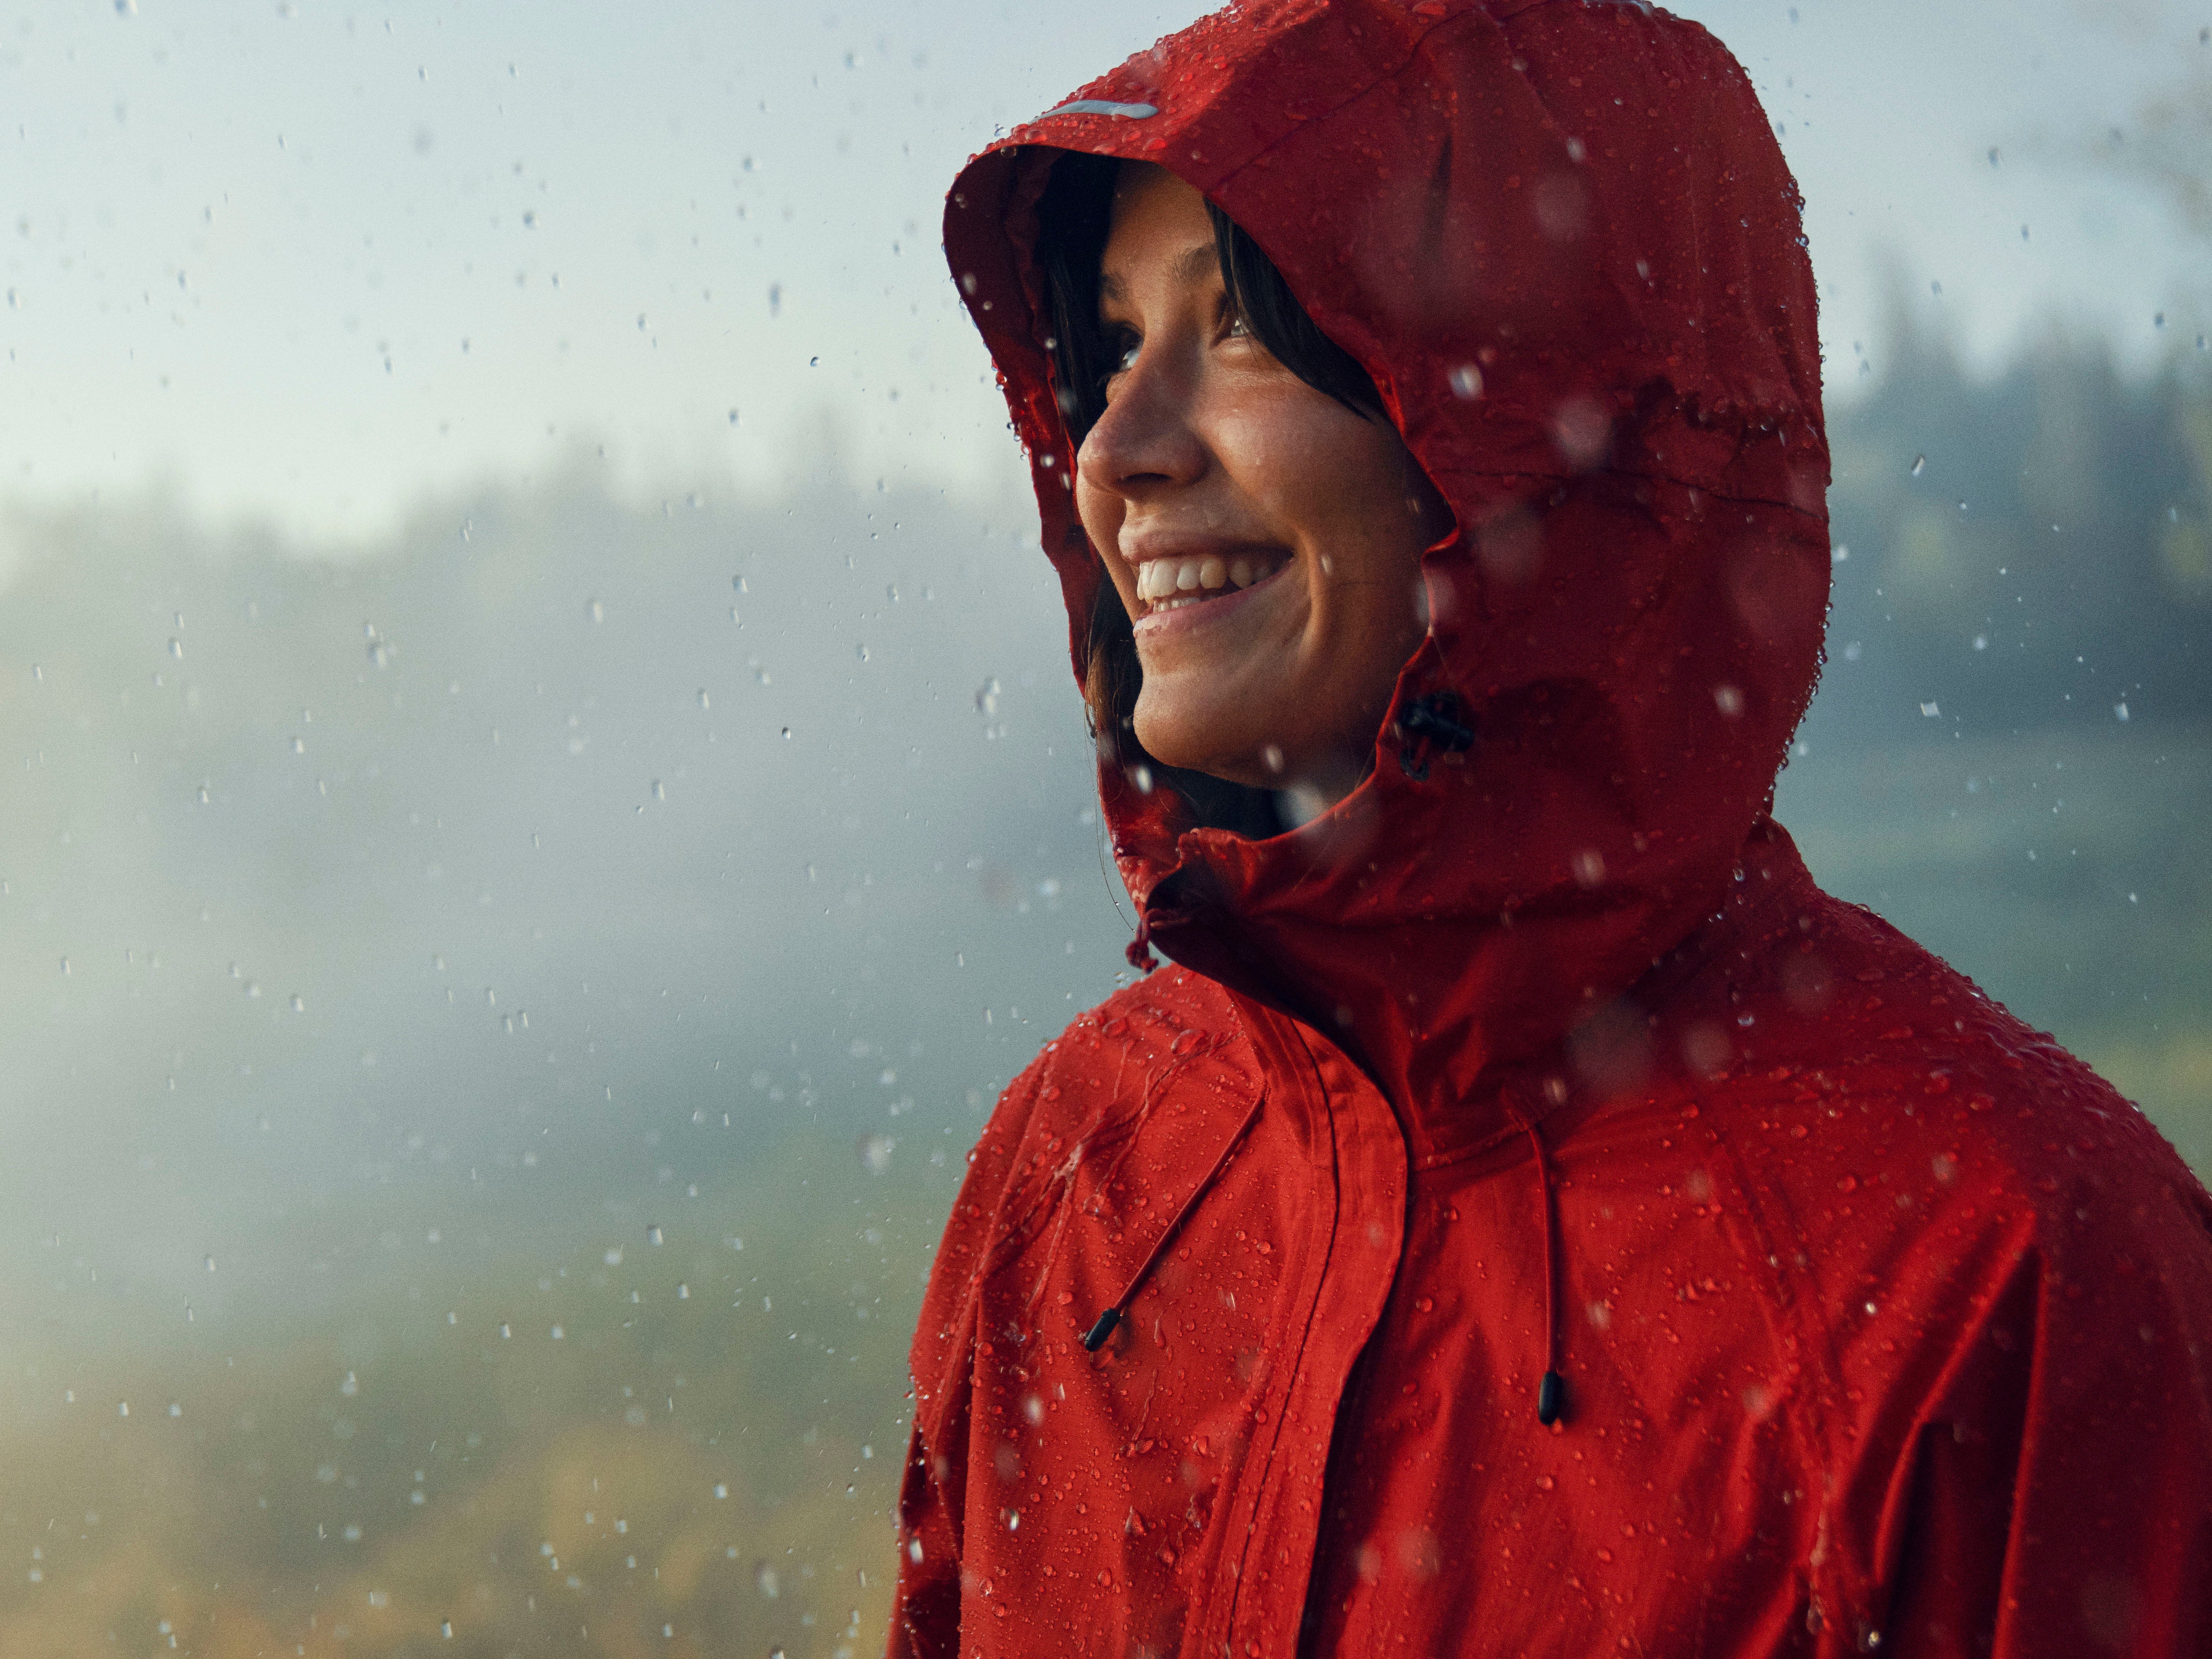 The High Coast Hydratic Jacket easily packs down and can be thrown on at the first sign of a summer shower